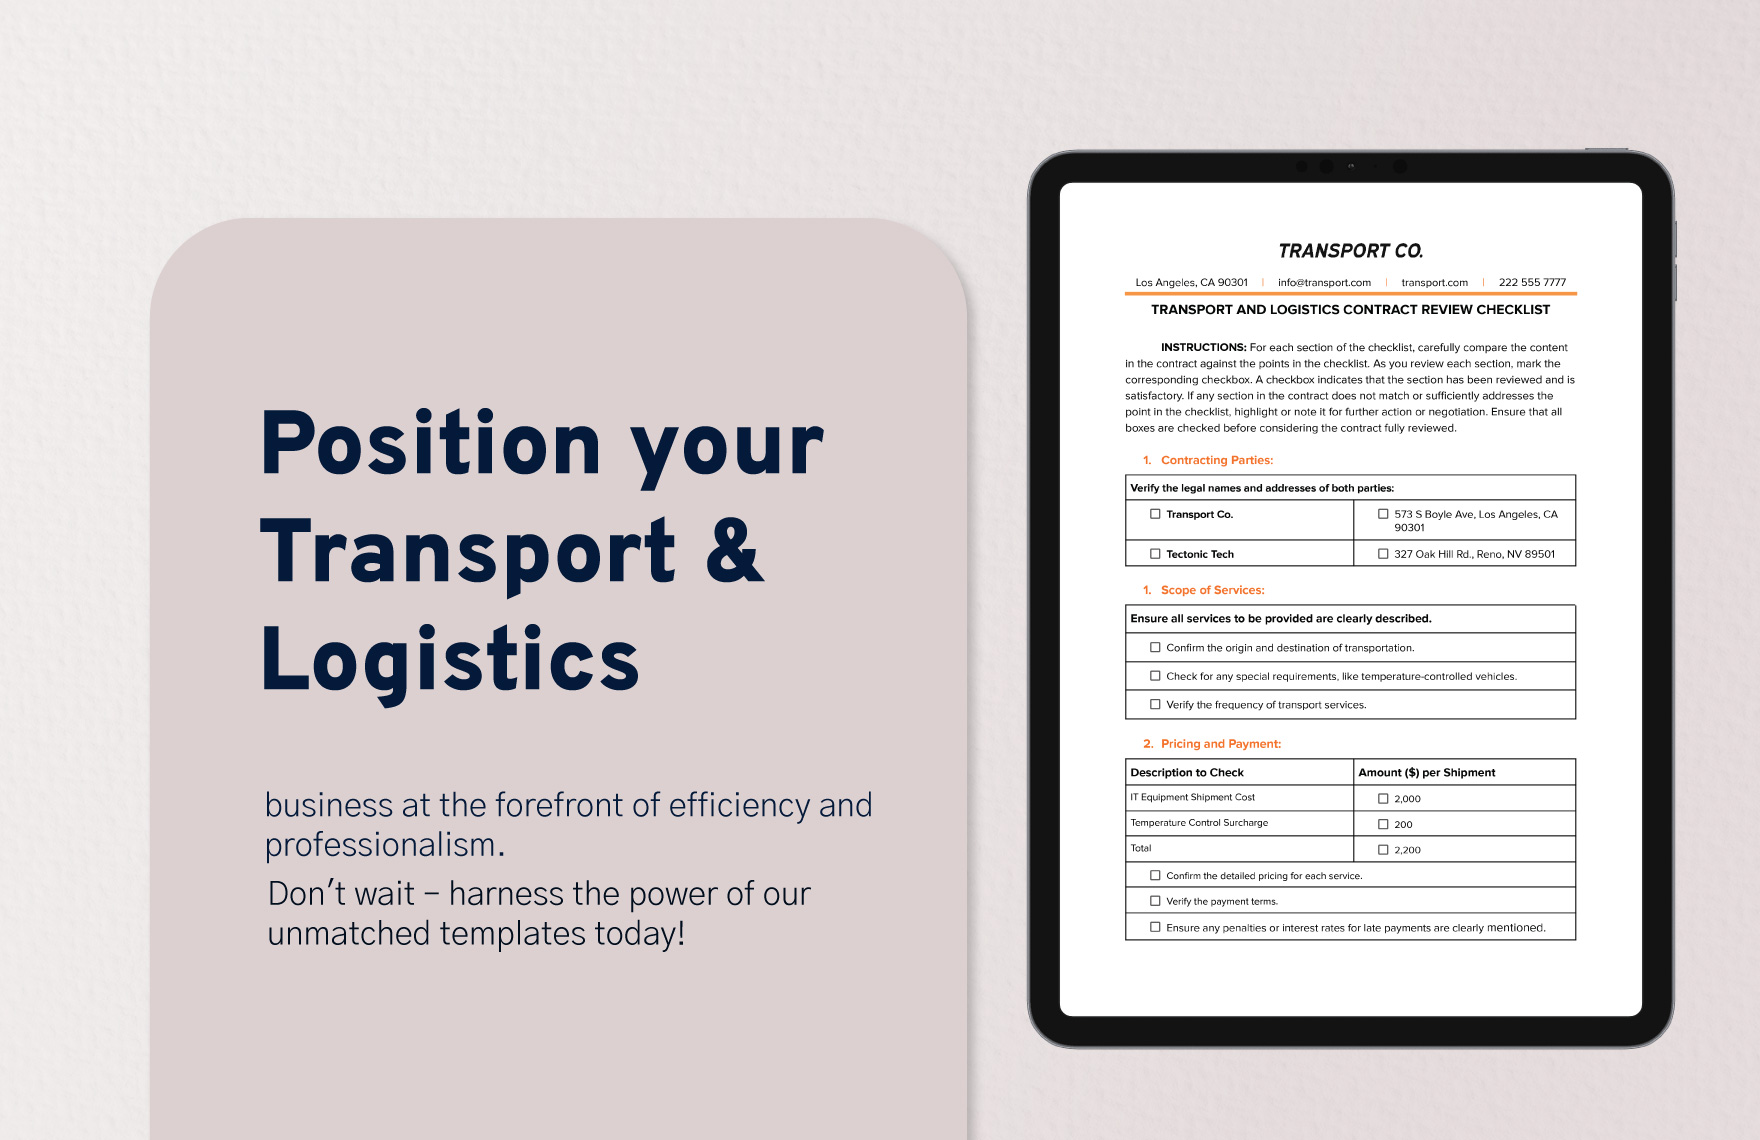 Transport and Logistics Contract Review Checklist Template